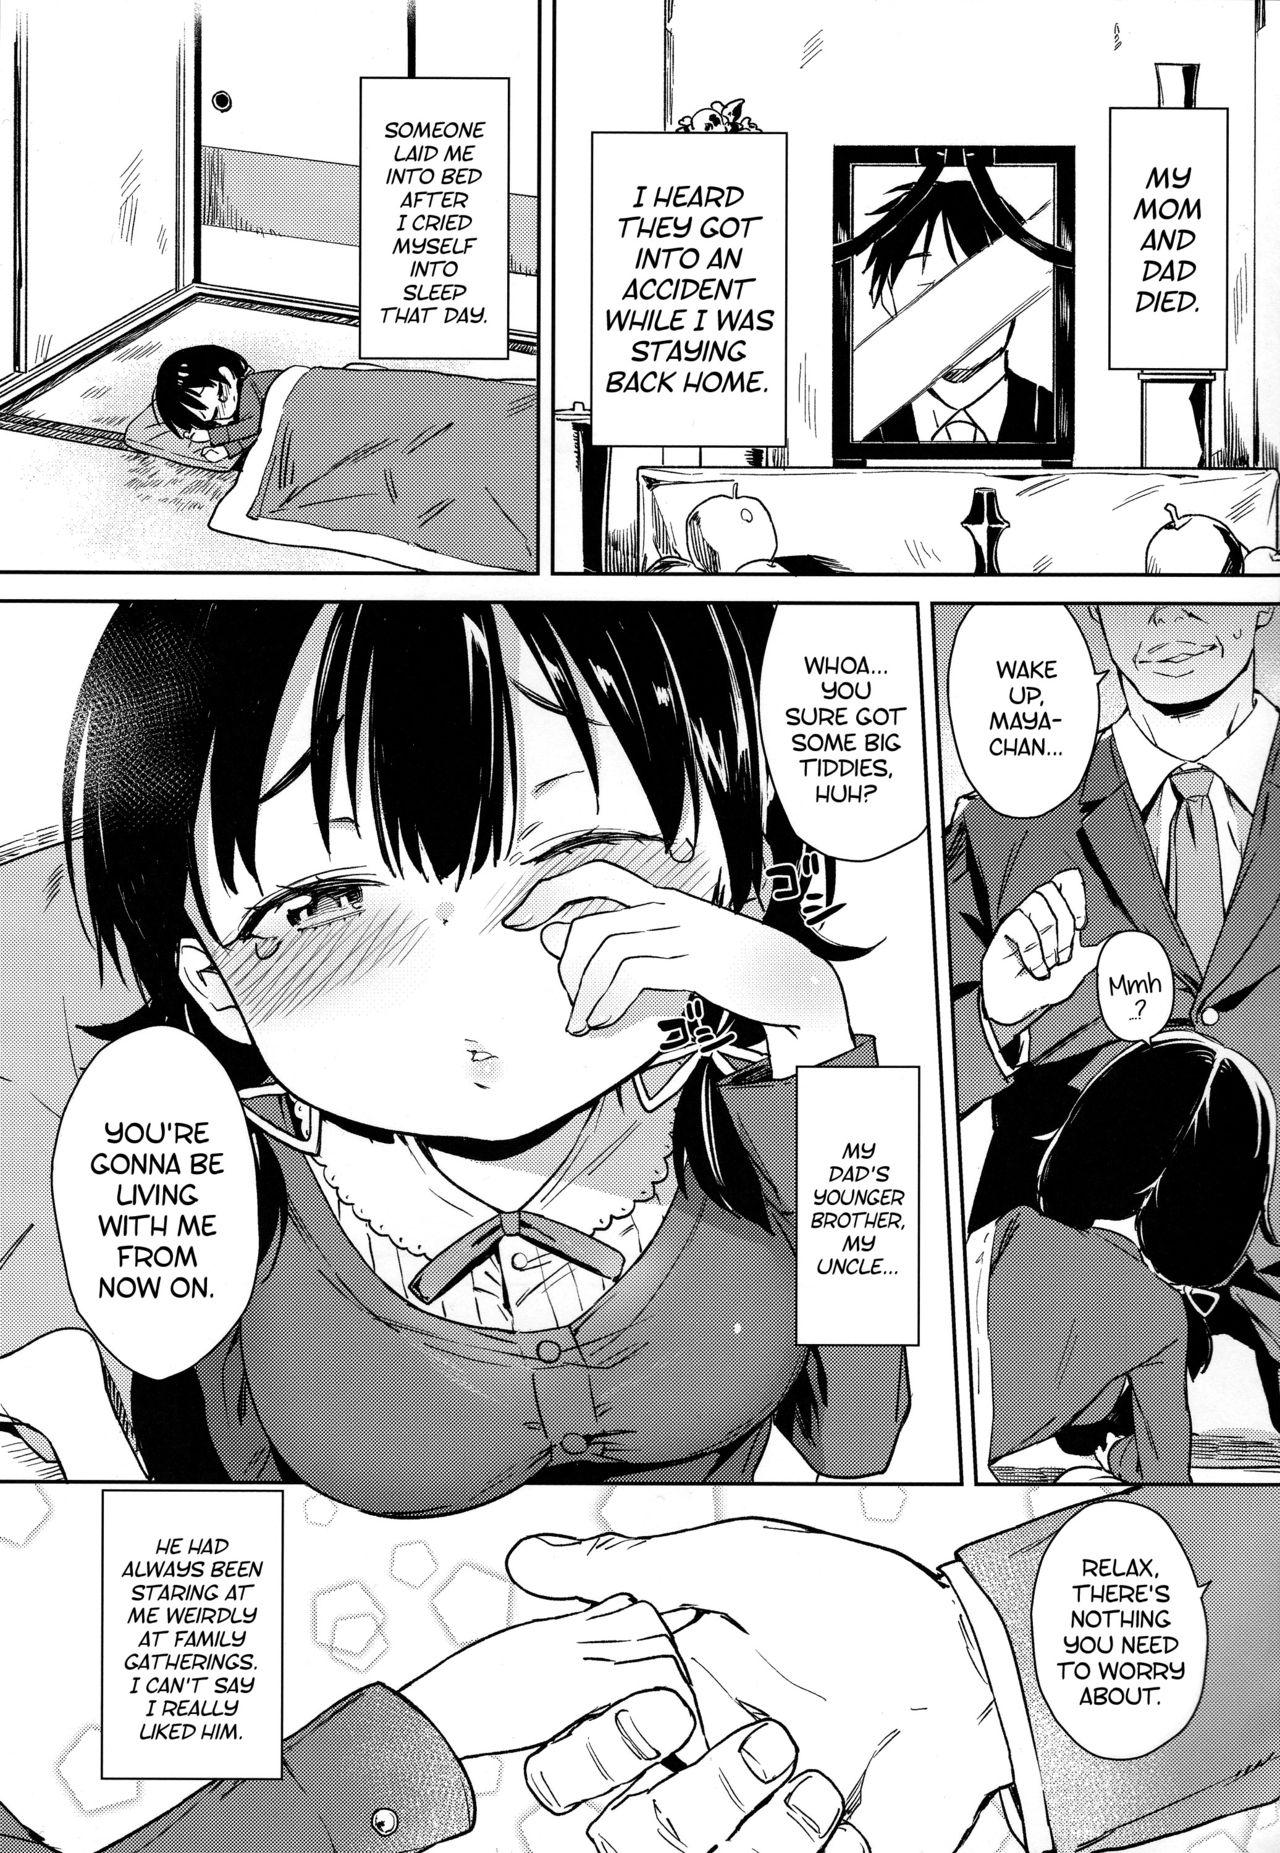 Best Blowjob Ever Musume ni Naru Hi | The day I became his daughter Scene - Page 2